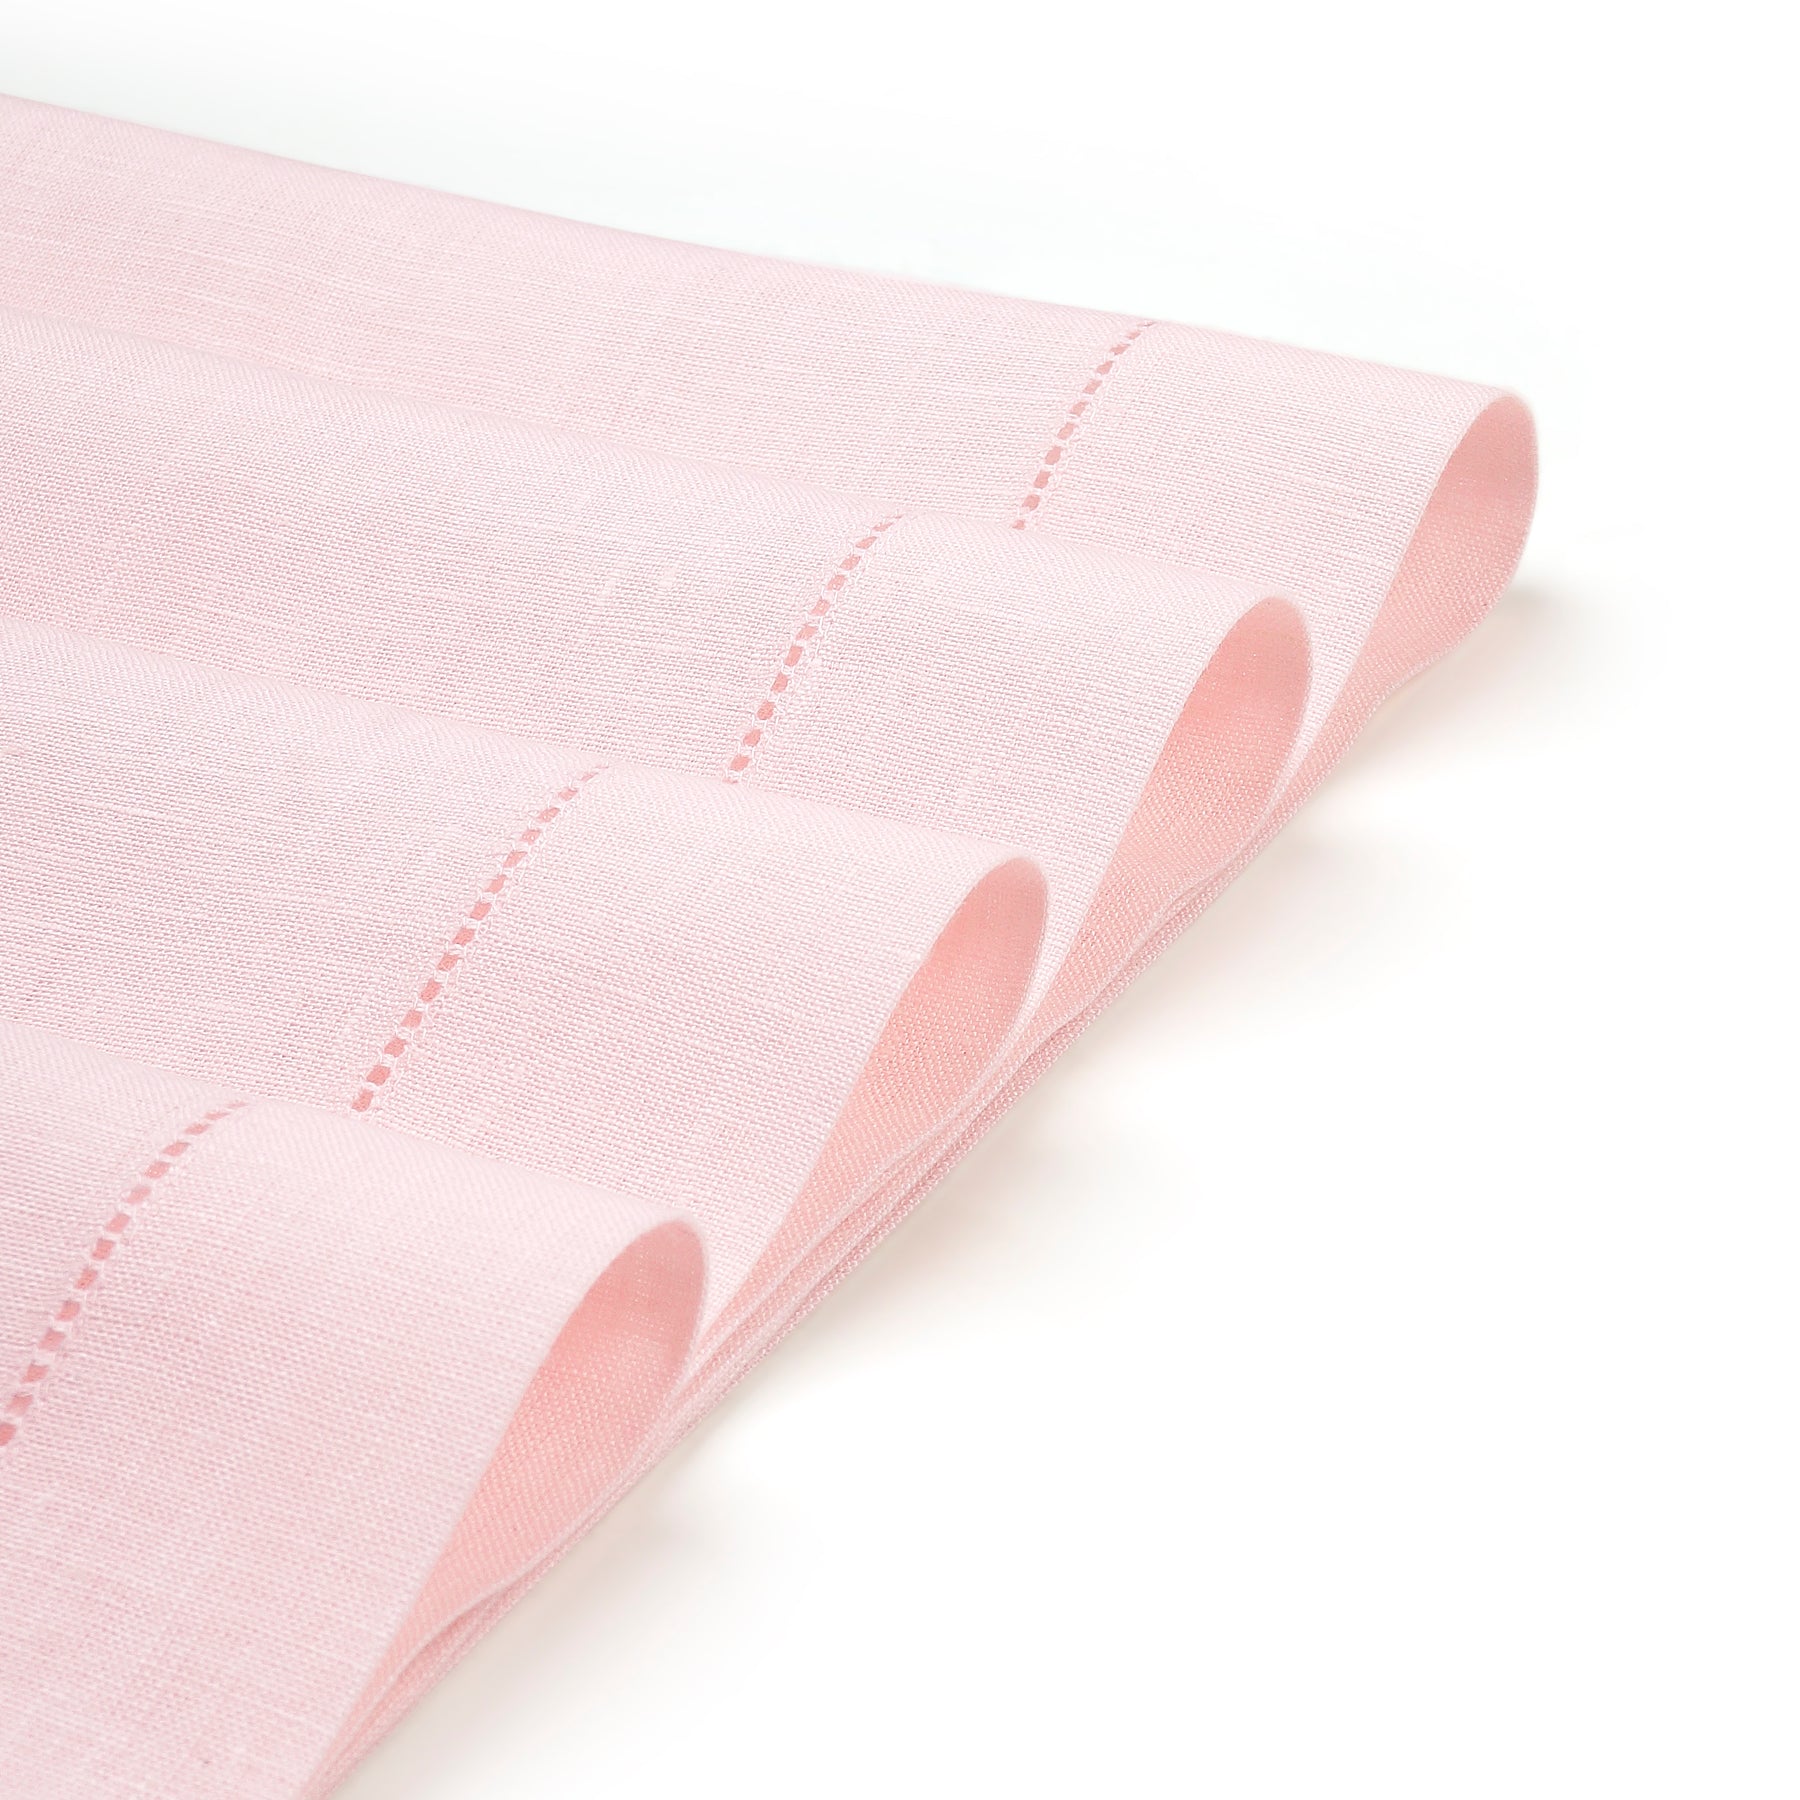 Pastel Pink Linen Placemats 14 x 19 Inch Set of 4 - Hemstitch